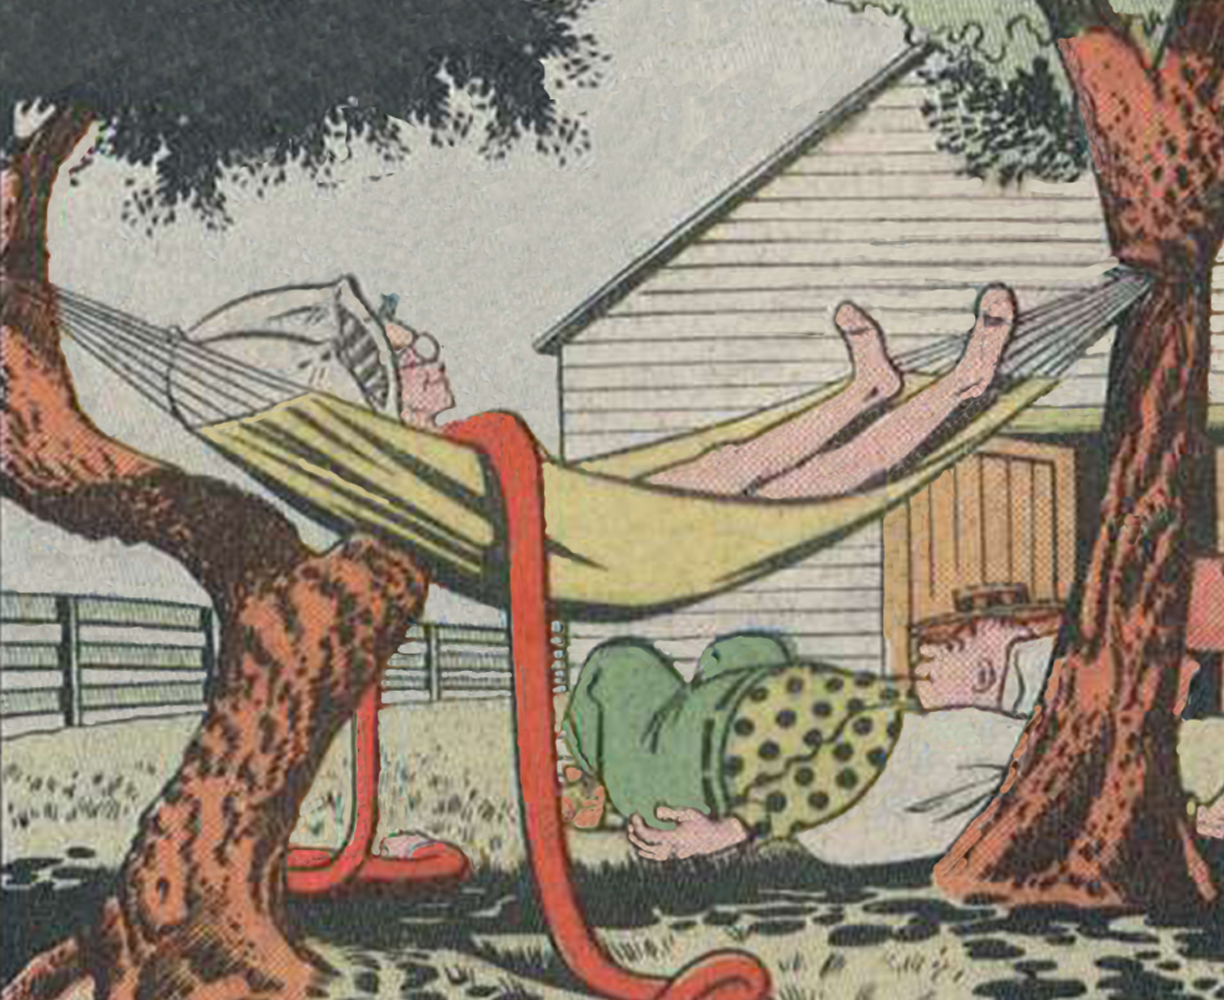 Plastic Man at the Farm #2 - This Is The Life episode cover